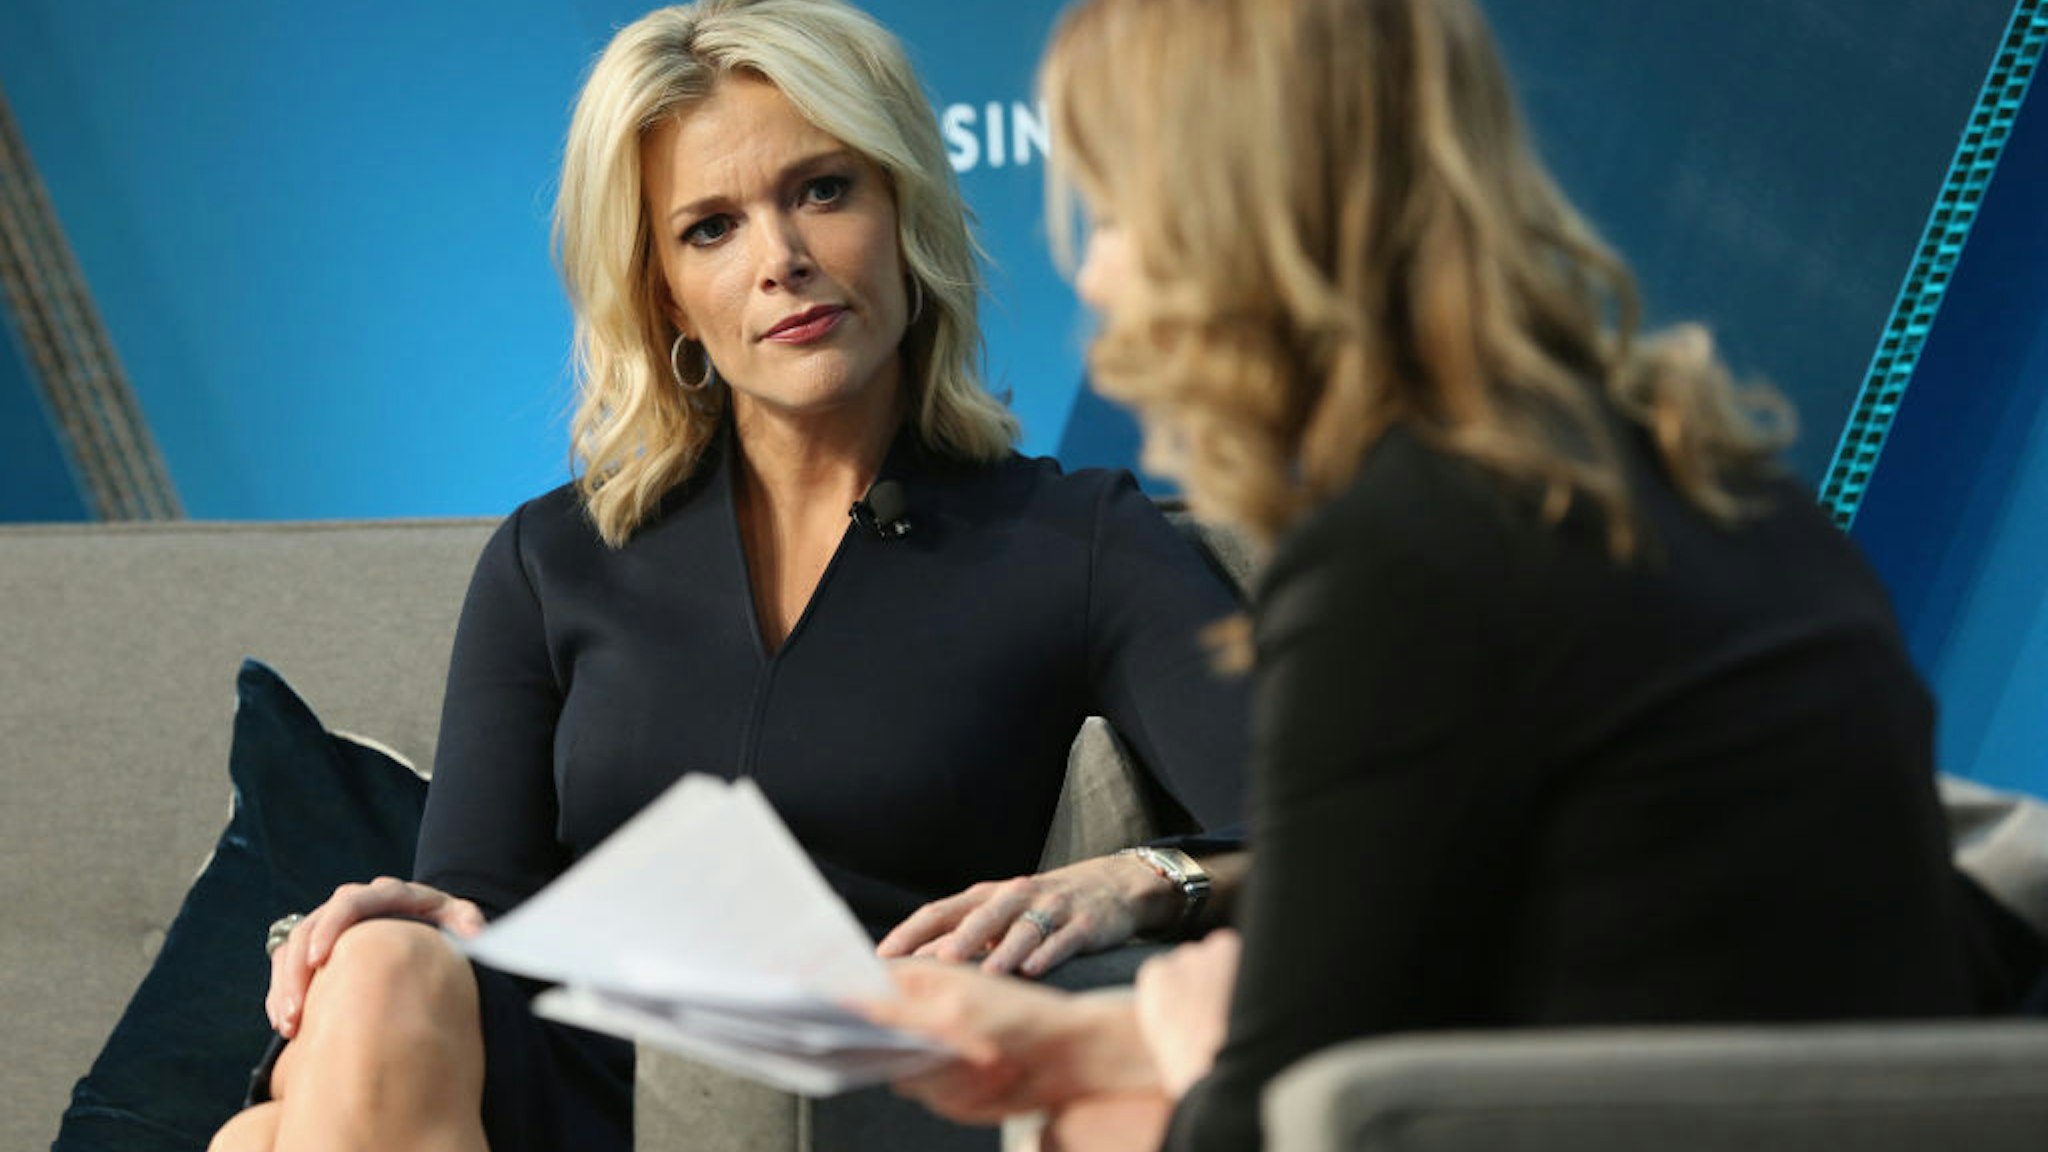 Megyn Kelly, NBC News Anchor and host of "Megyn Kelly Today" speaks onstage with Alyson Shontell at IGNITION: Future of Media at Time Warner Center on November 29, 2017 in New York City.